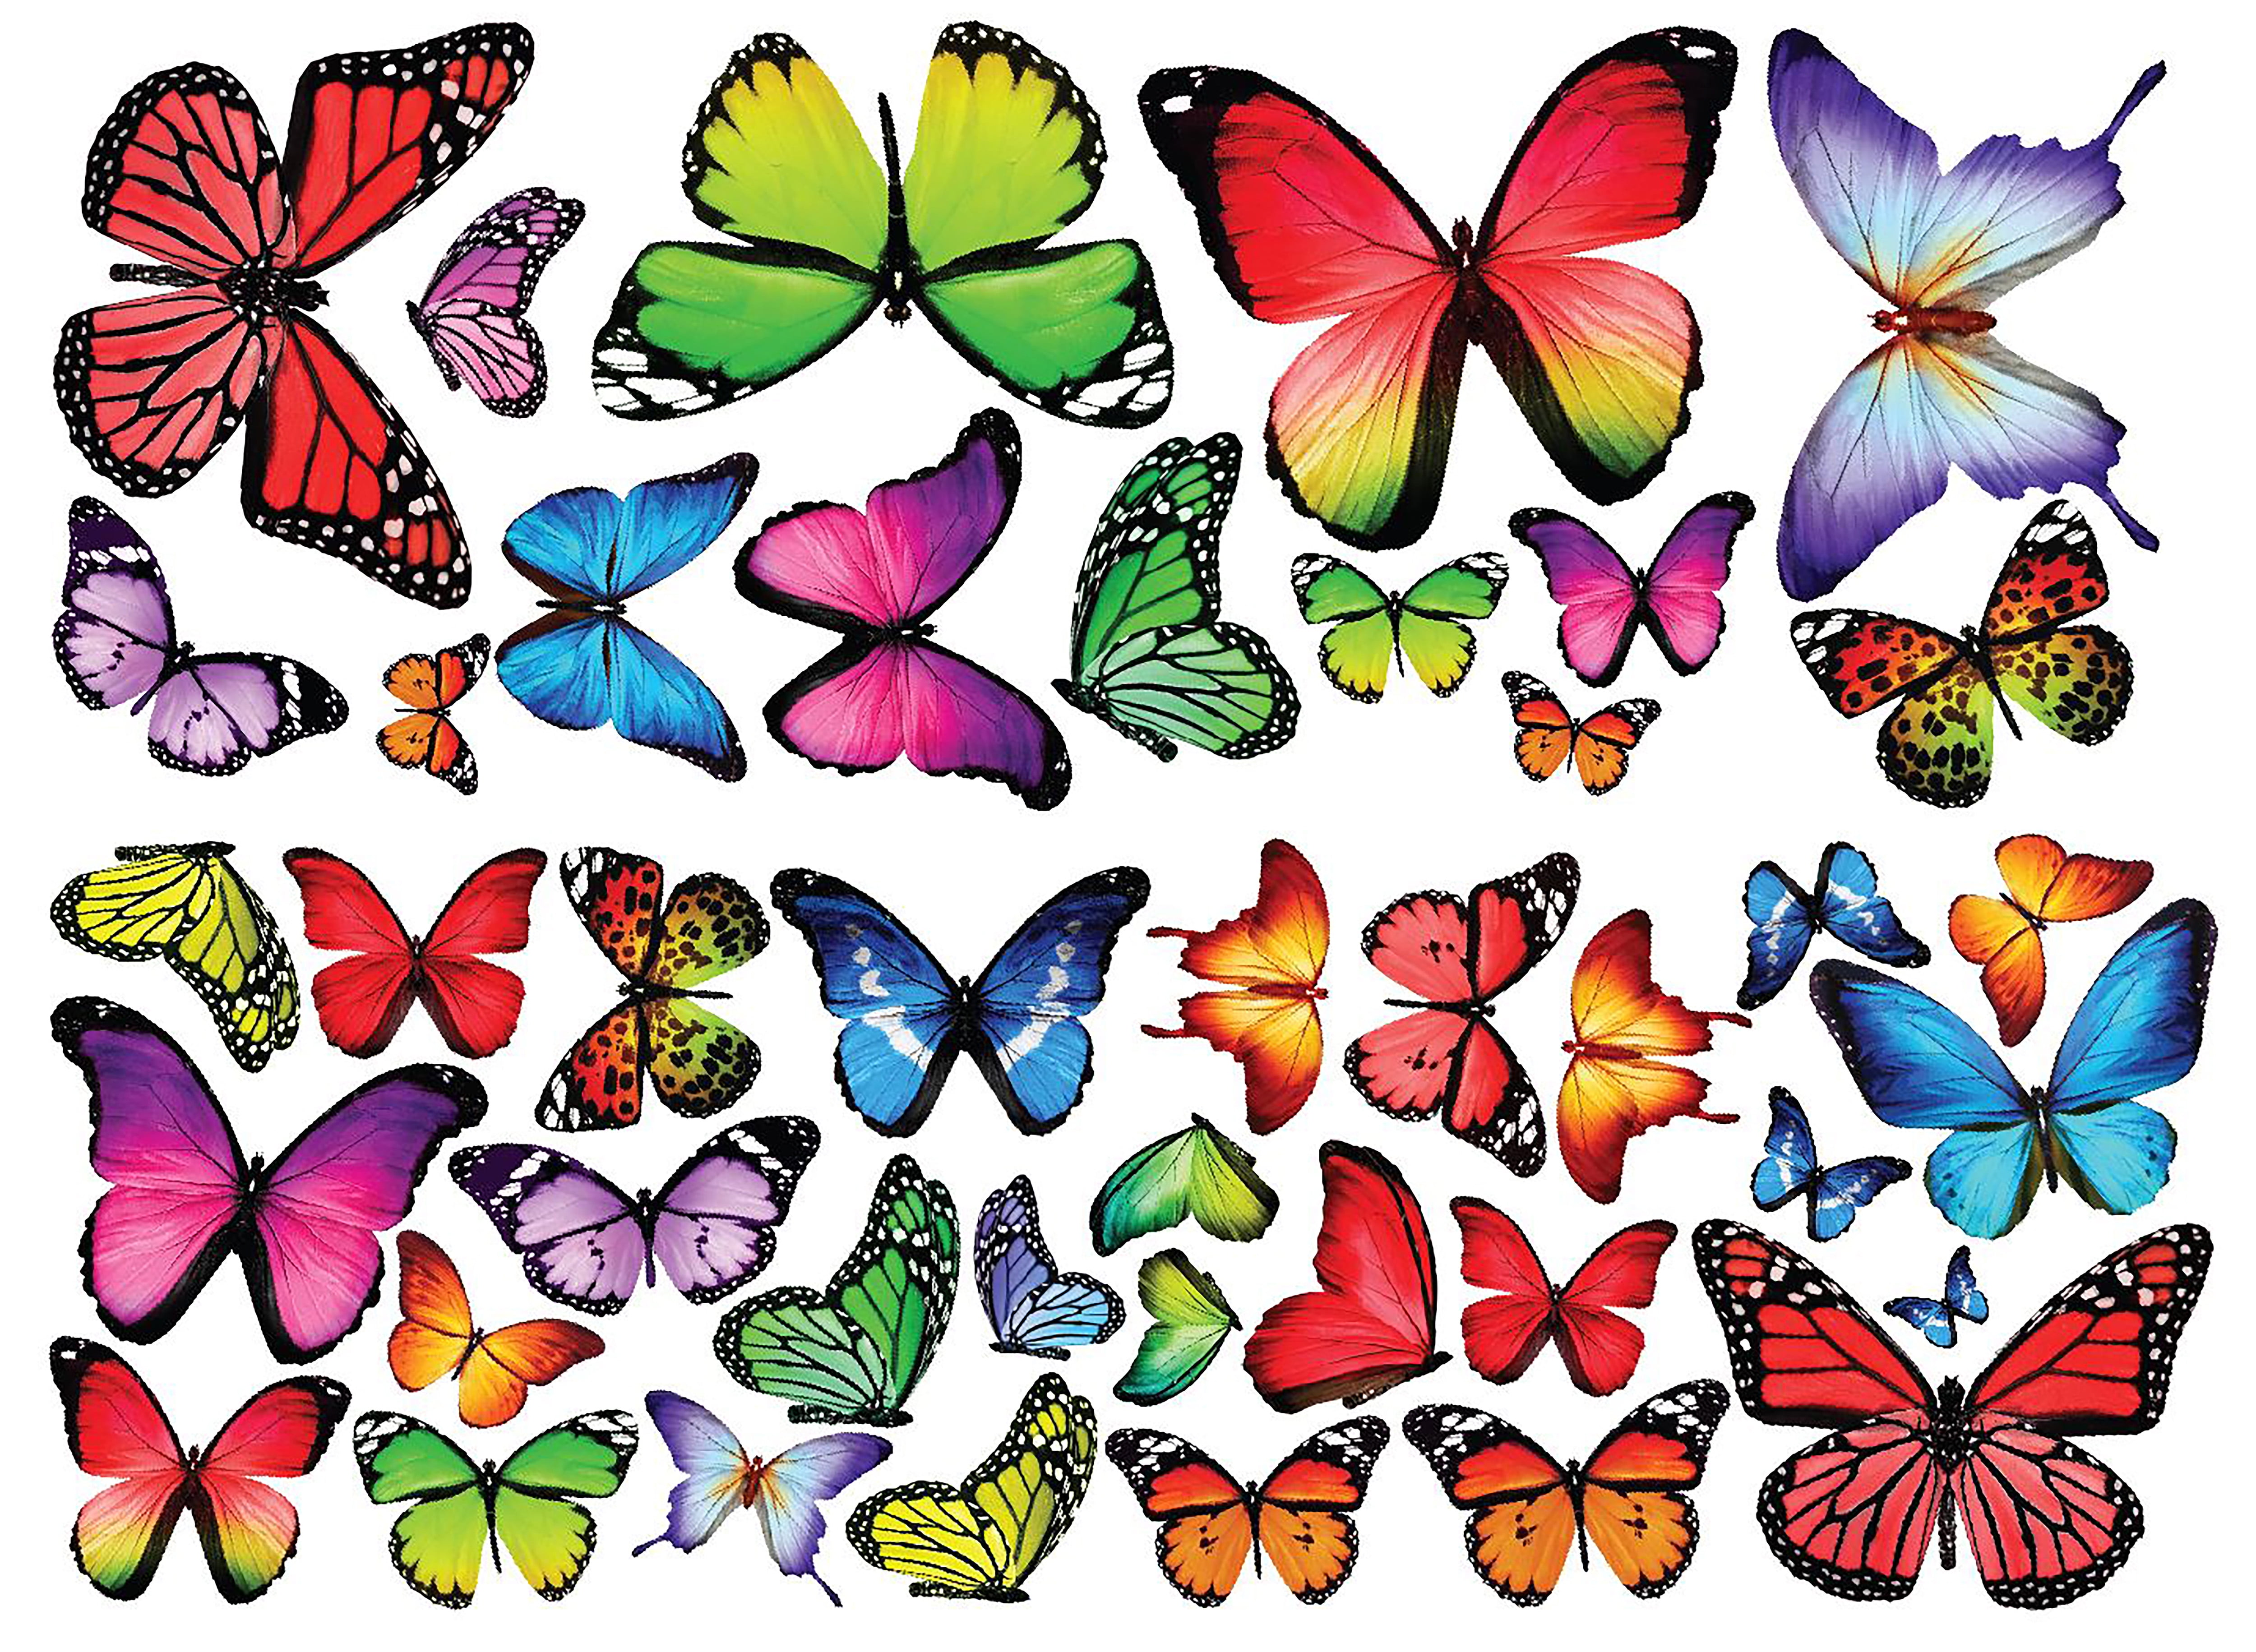 Set 4x sticker decal car laptop macbook kitchen butterfly rainbow colored room 